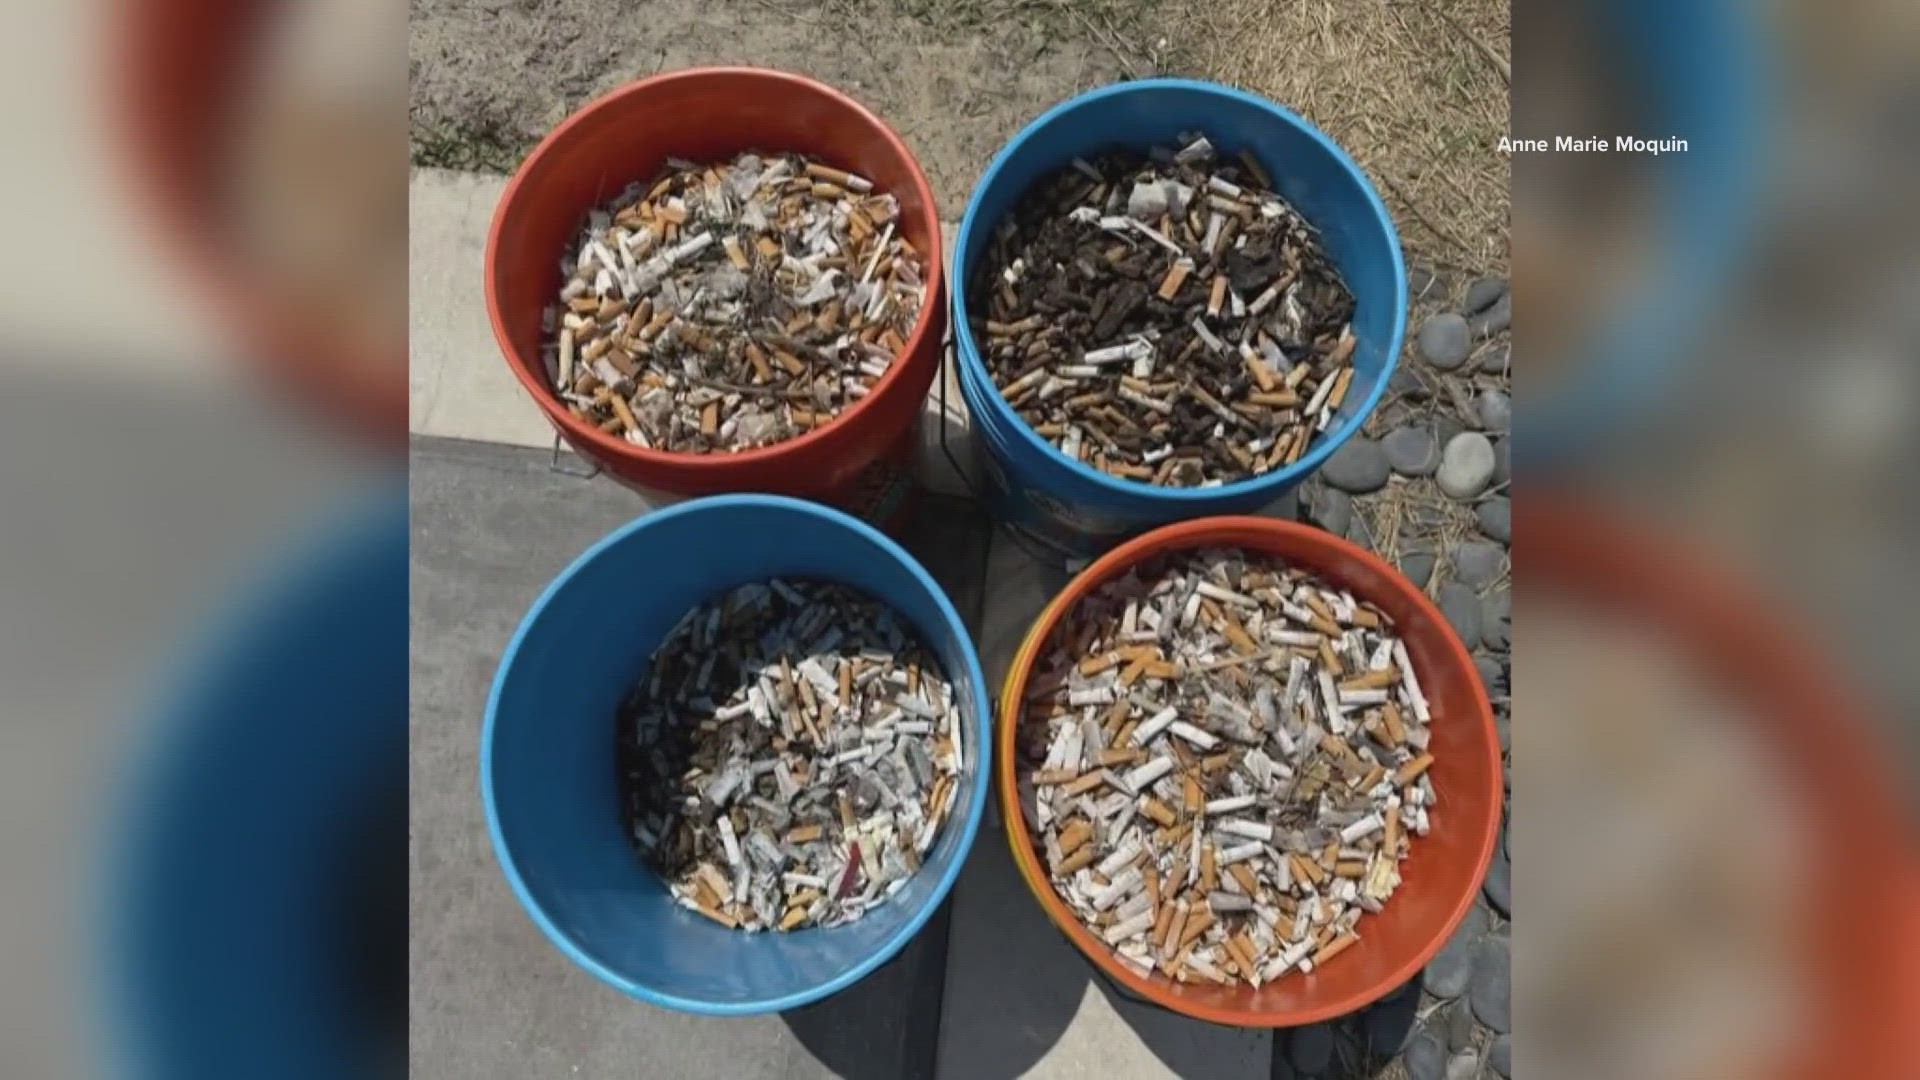 Hundreds of volunteers with Beaches Go Green collected more than 18,000 cigarette butts from across First Coast beaches on Saturday.